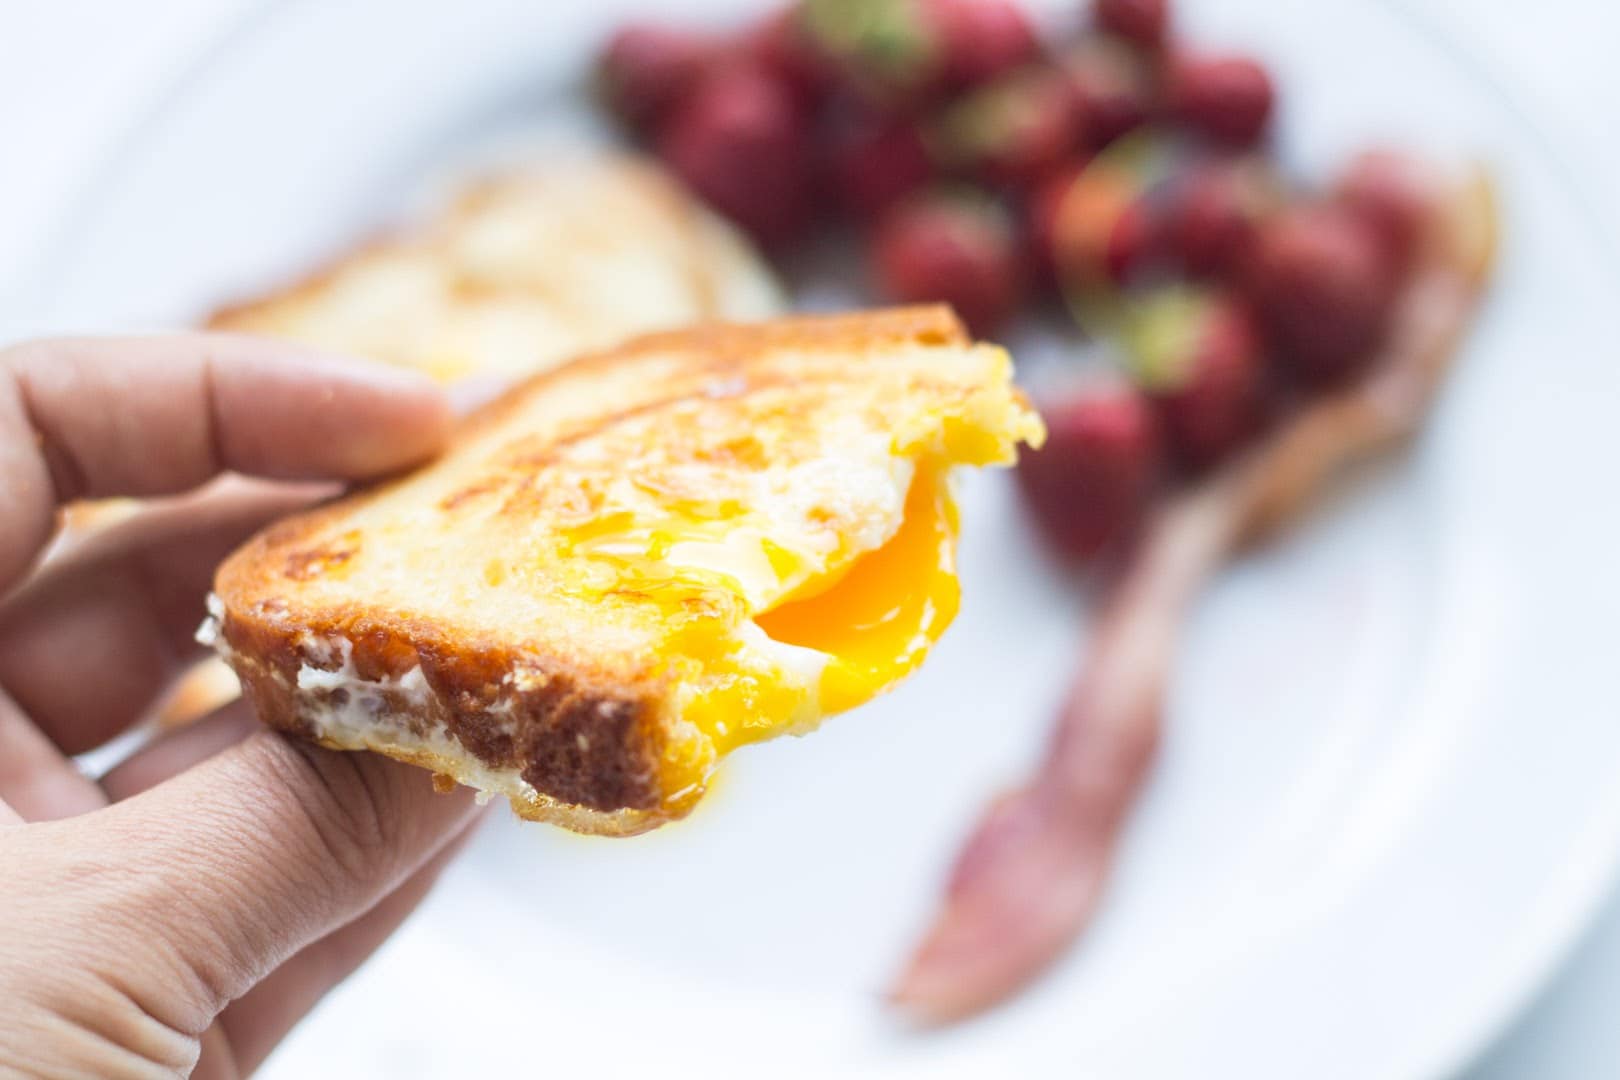 A hand holding a slice of toasted bread containing an over-medium egg cooked into the center.